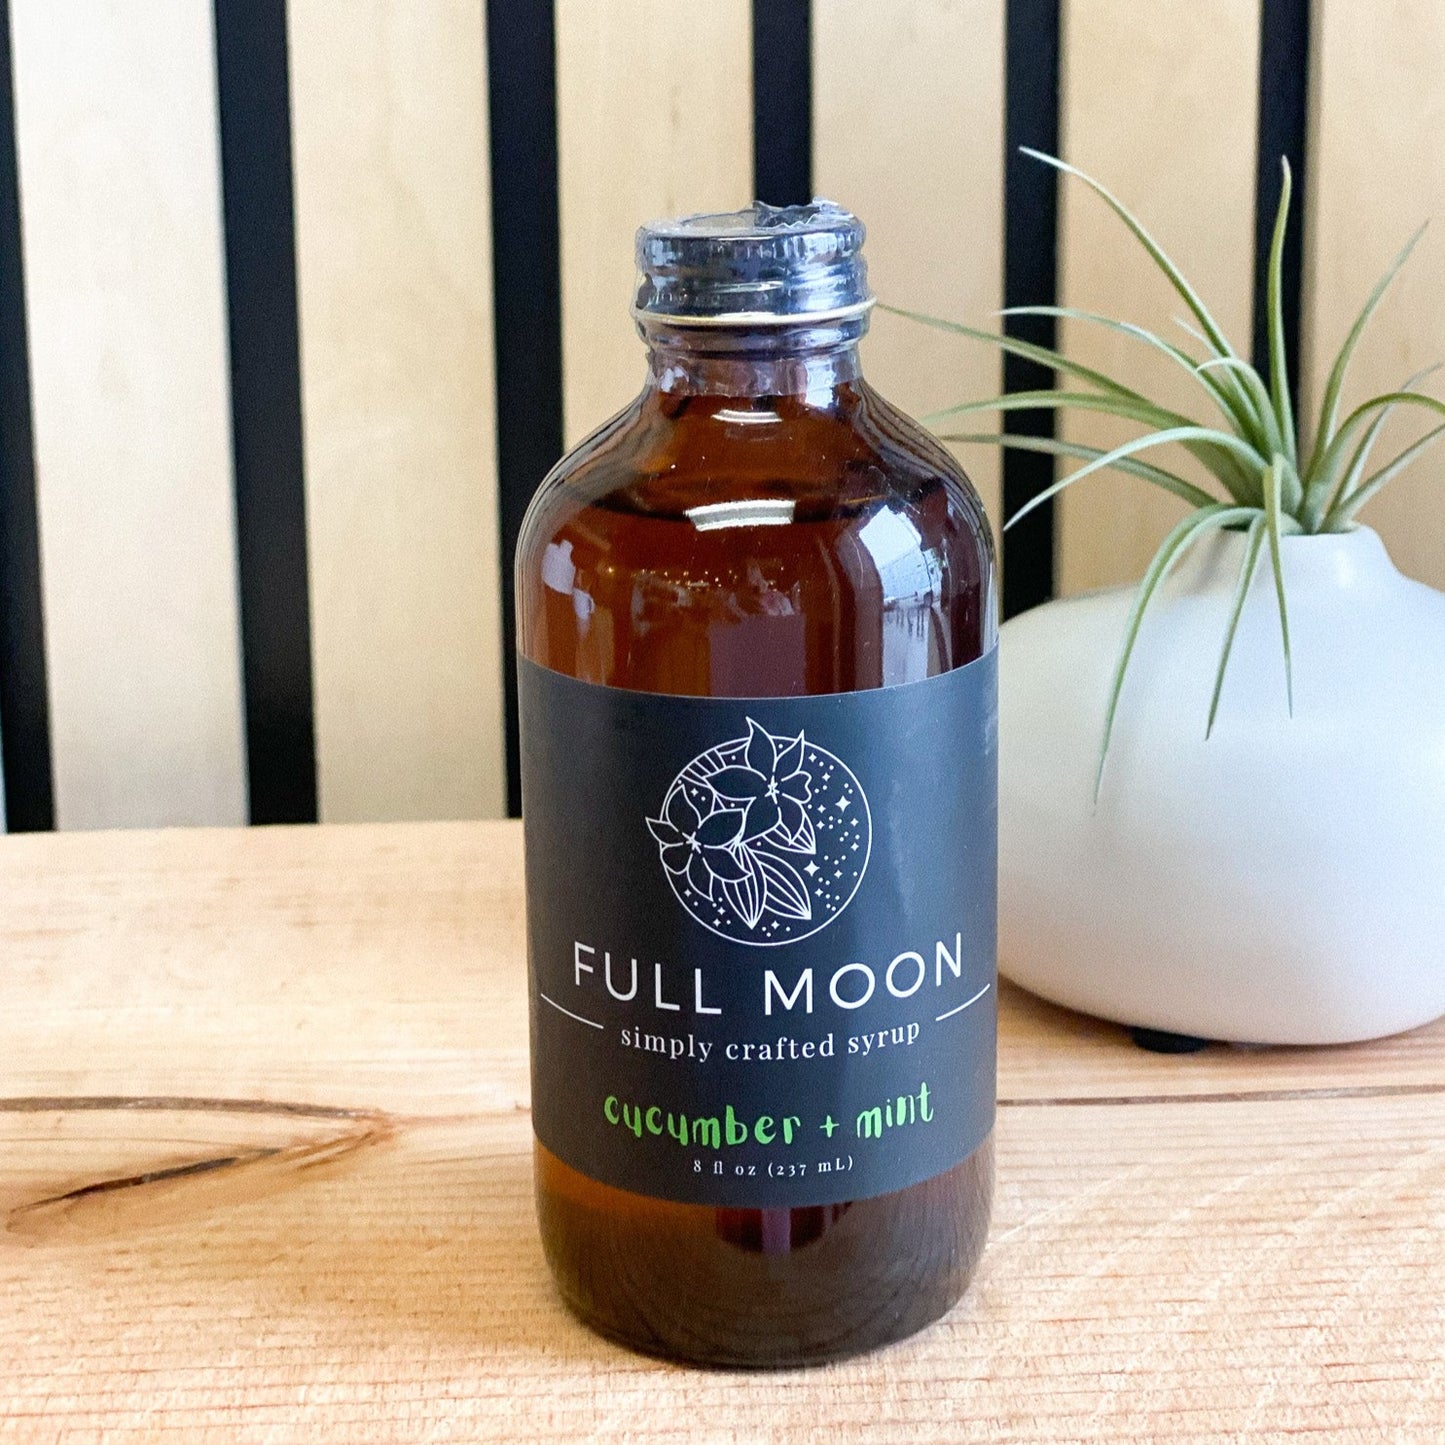 Cucumber & Mint Simple Syrup by Full Moon